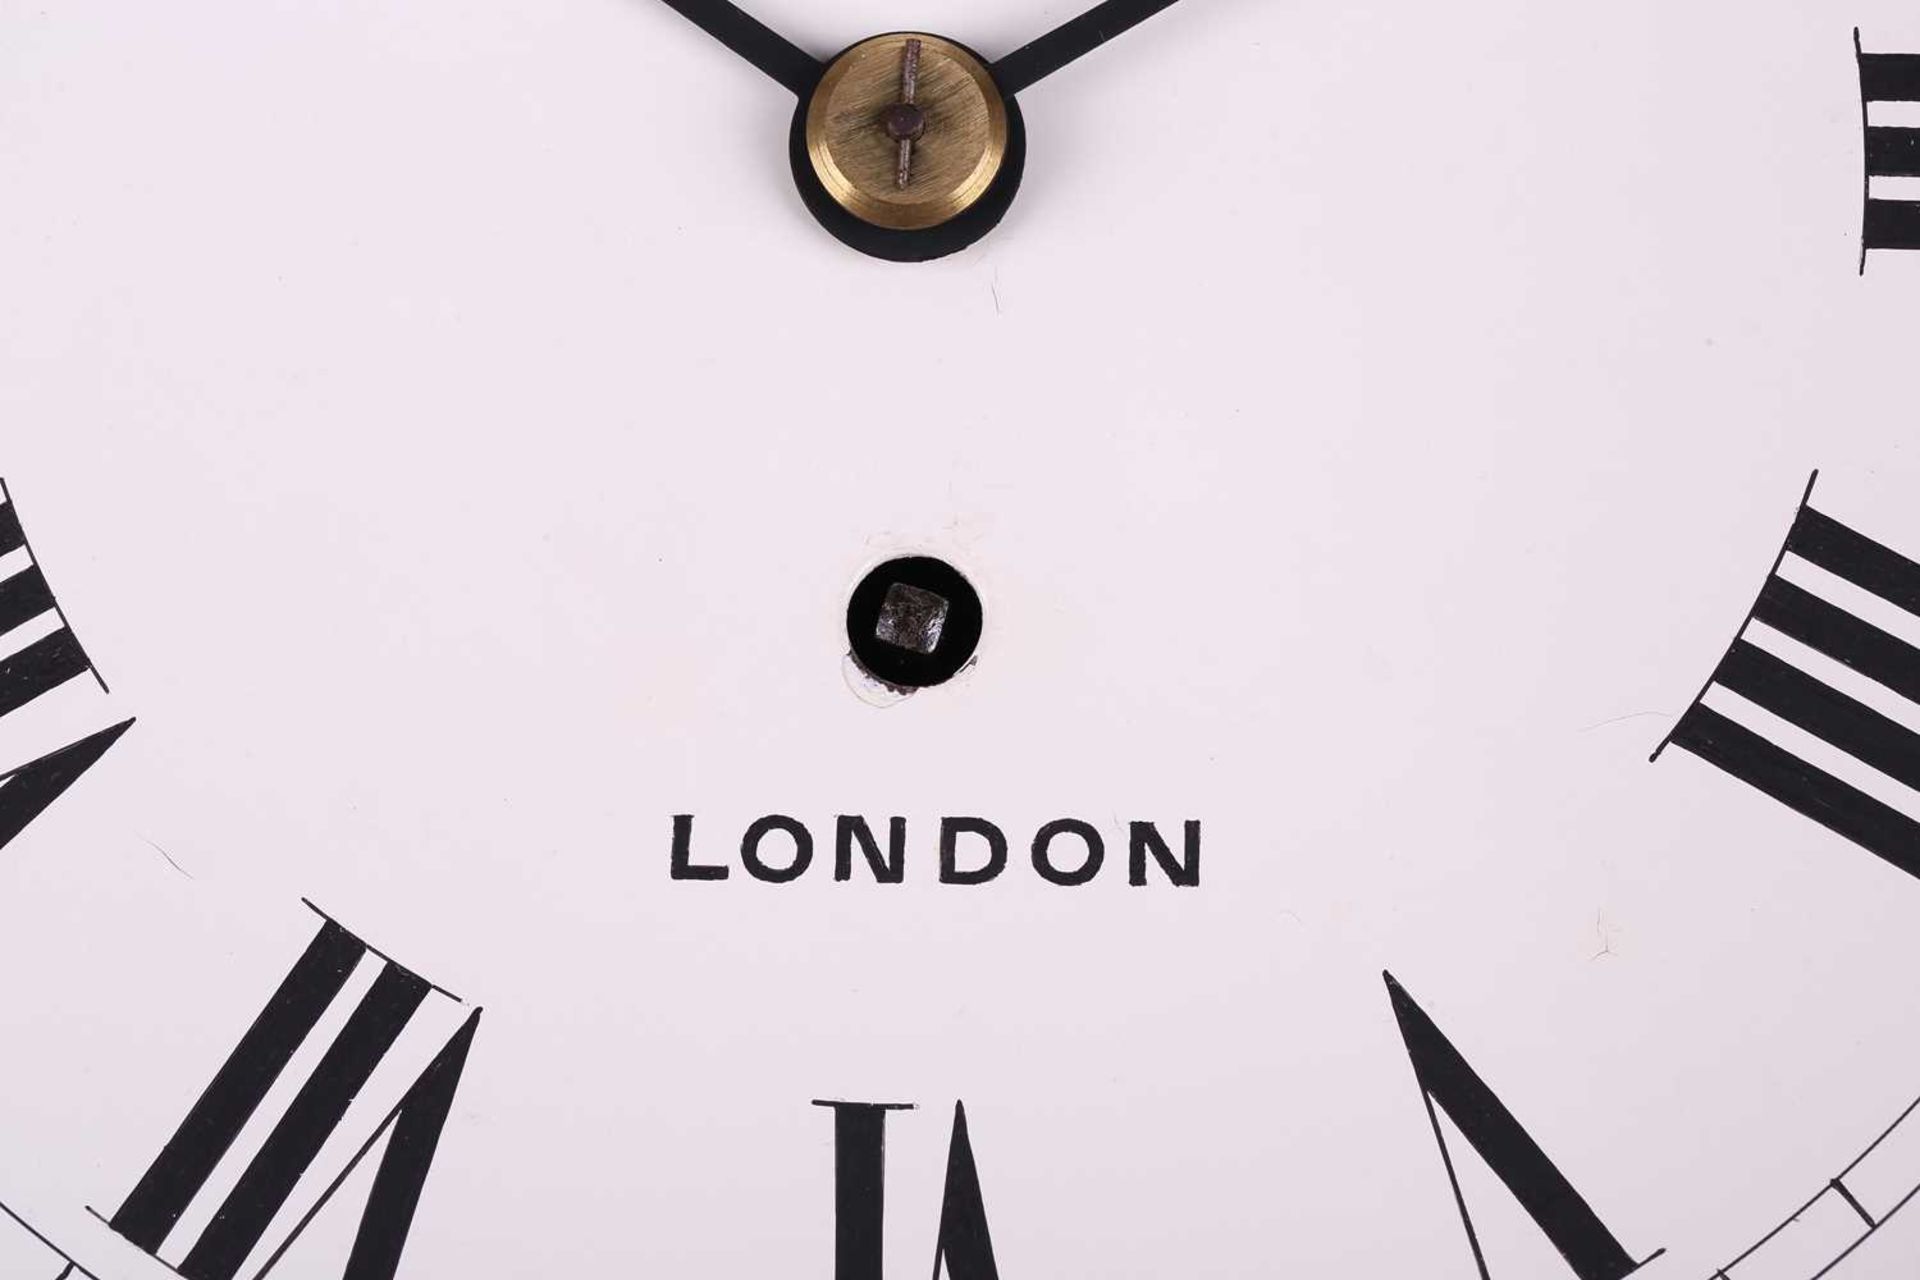 A Camerer Cuss of 54/6 Oxford St, London, an unusually small single fusee wall timepiece with a - Image 11 of 11